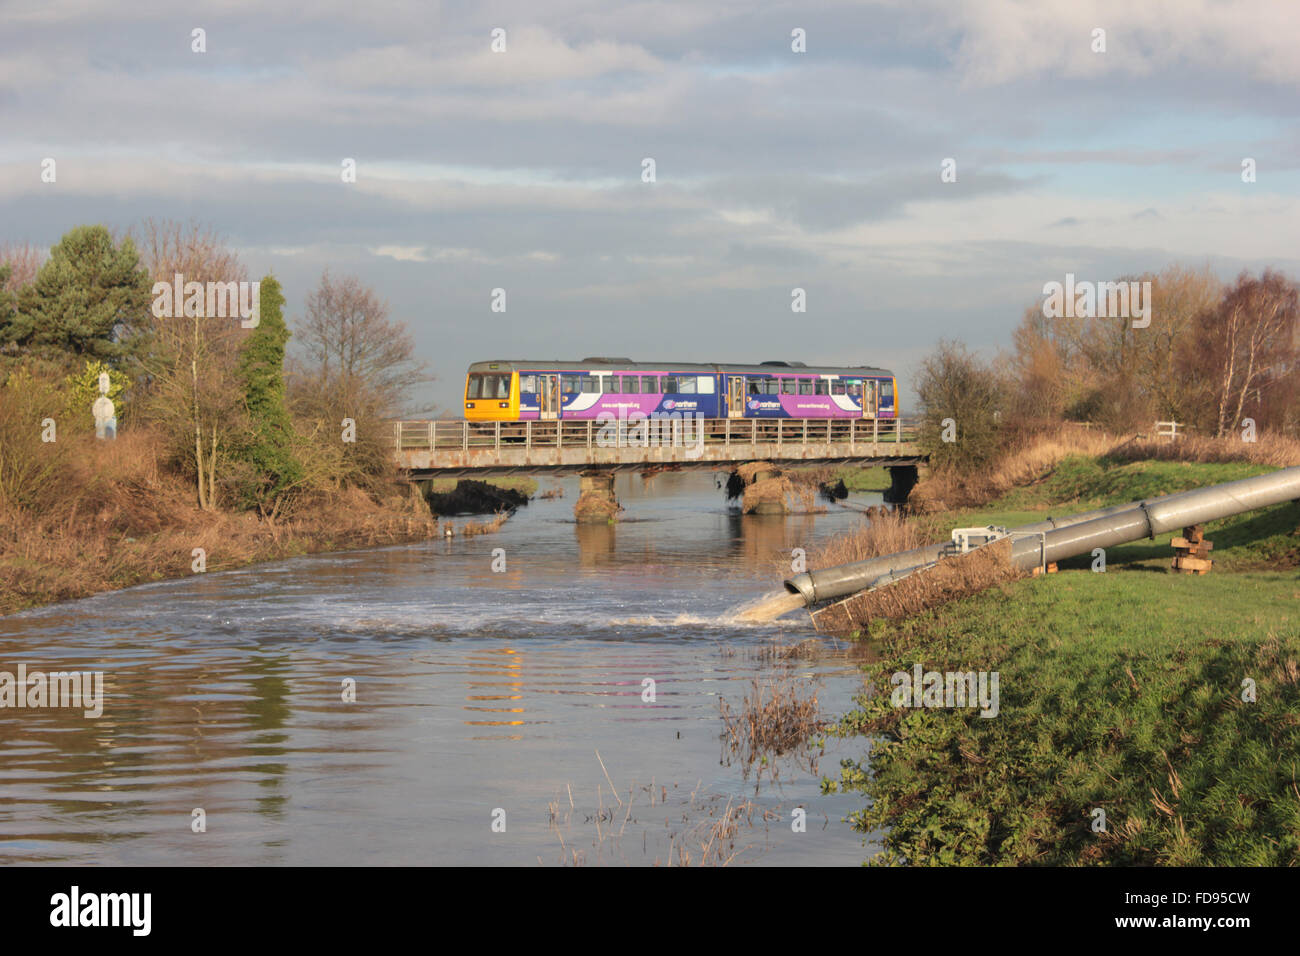 A Northern train service formed of a “Pacer” train crosses the River Douglas in Rufford Stock Photo